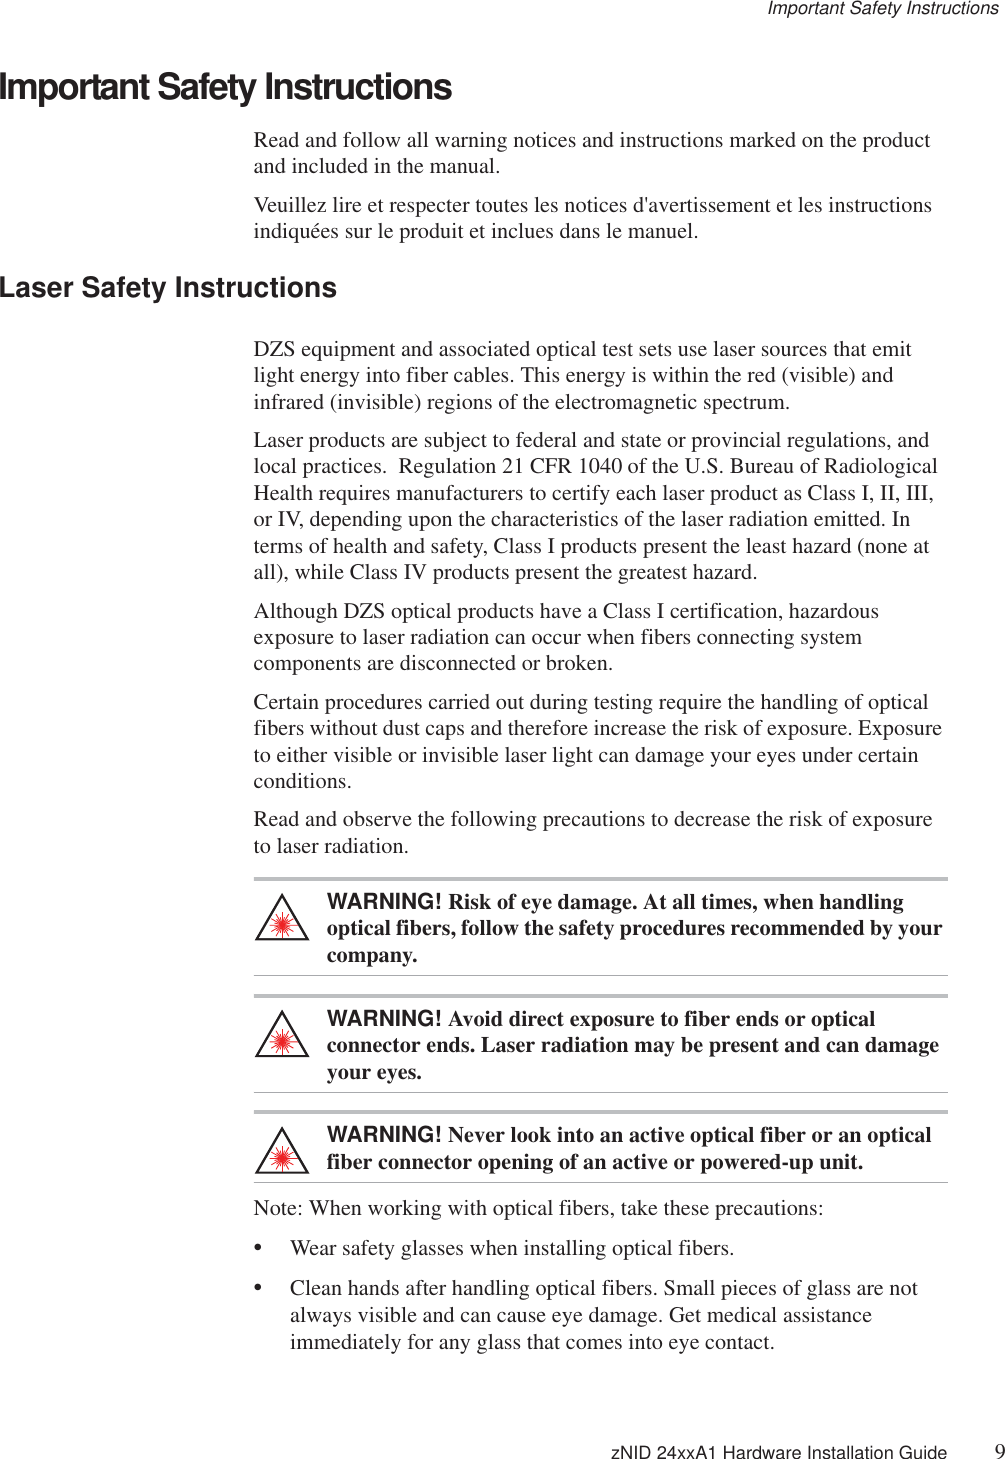 Important Safety Instructions zNID 24xxA1 Hardware Installation Guide 9Important Safety InstructionsRead and follow all warning notices and instructions marked on the product and included in the manual.Veuillez lire et respecter toutes les notices d&apos;avertissement et les instructions indiquées sur le produit et inclues dans le manuel.Laser Safety InstructionsDZS equipment and associated optical test sets use laser sources that emit light energy into fiber cables. This energy is within the red (visible) and infrared (invisible) regions of the electromagnetic spectrum.Laser products are subject to federal and state or provincial regulations, and local practices.  Regulation 21 CFR 1040 of the U.S. Bureau of Radiological Health requires manufacturers to certify each laser product as Class I, II, III, or IV, depending upon the characteristics of the laser radiation emitted. In terms of health and safety, Class I products present the least hazard (none at all), while Class IV products present the greatest hazard.Although DZS optical products have a Class I certification, hazardous exposure to laser radiation can occur when fibers connecting system components are disconnected or broken.Certain procedures carried out during testing require the handling of optical fibers without dust caps and therefore increase the risk of exposure. Exposure to either visible or invisible laser light can damage your eyes under certain conditions.Read and observe the following precautions to decrease the risk of exposure to laser radiation.WARNING! Risk of eye damage. At all times, when handling optical fibers, follow the safety procedures recommended by your company.WARNING! Avoid direct exposure to fiber ends or optical connector ends. Laser radiation may be present and can damage your eyes.WARNING! Never look into an active optical fiber or an optical fiber connector opening of an active or powered-up unit.Note: When working with optical fibers, take these precautions:•Wear safety glasses when installing optical fibers.•Clean hands after handling optical fibers. Small pieces of glass are not always visible and can cause eye damage. Get medical assistance immediately for any glass that comes into eye contact.